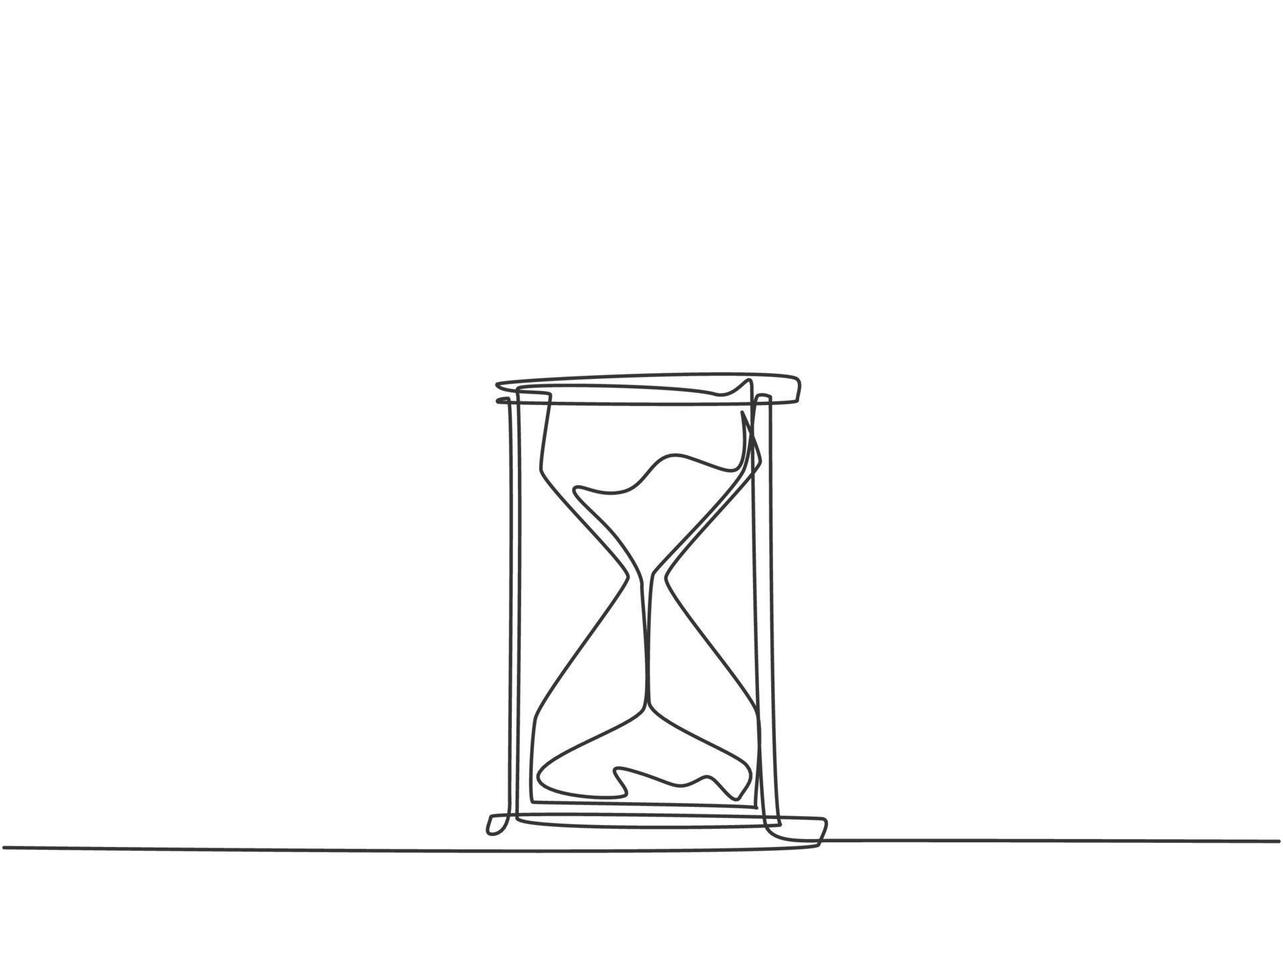 Single continuous line drawing of old retro hourglass. Classic vintage sandglass timepiece concept. Dynamic one line draw graphic design vector illustration